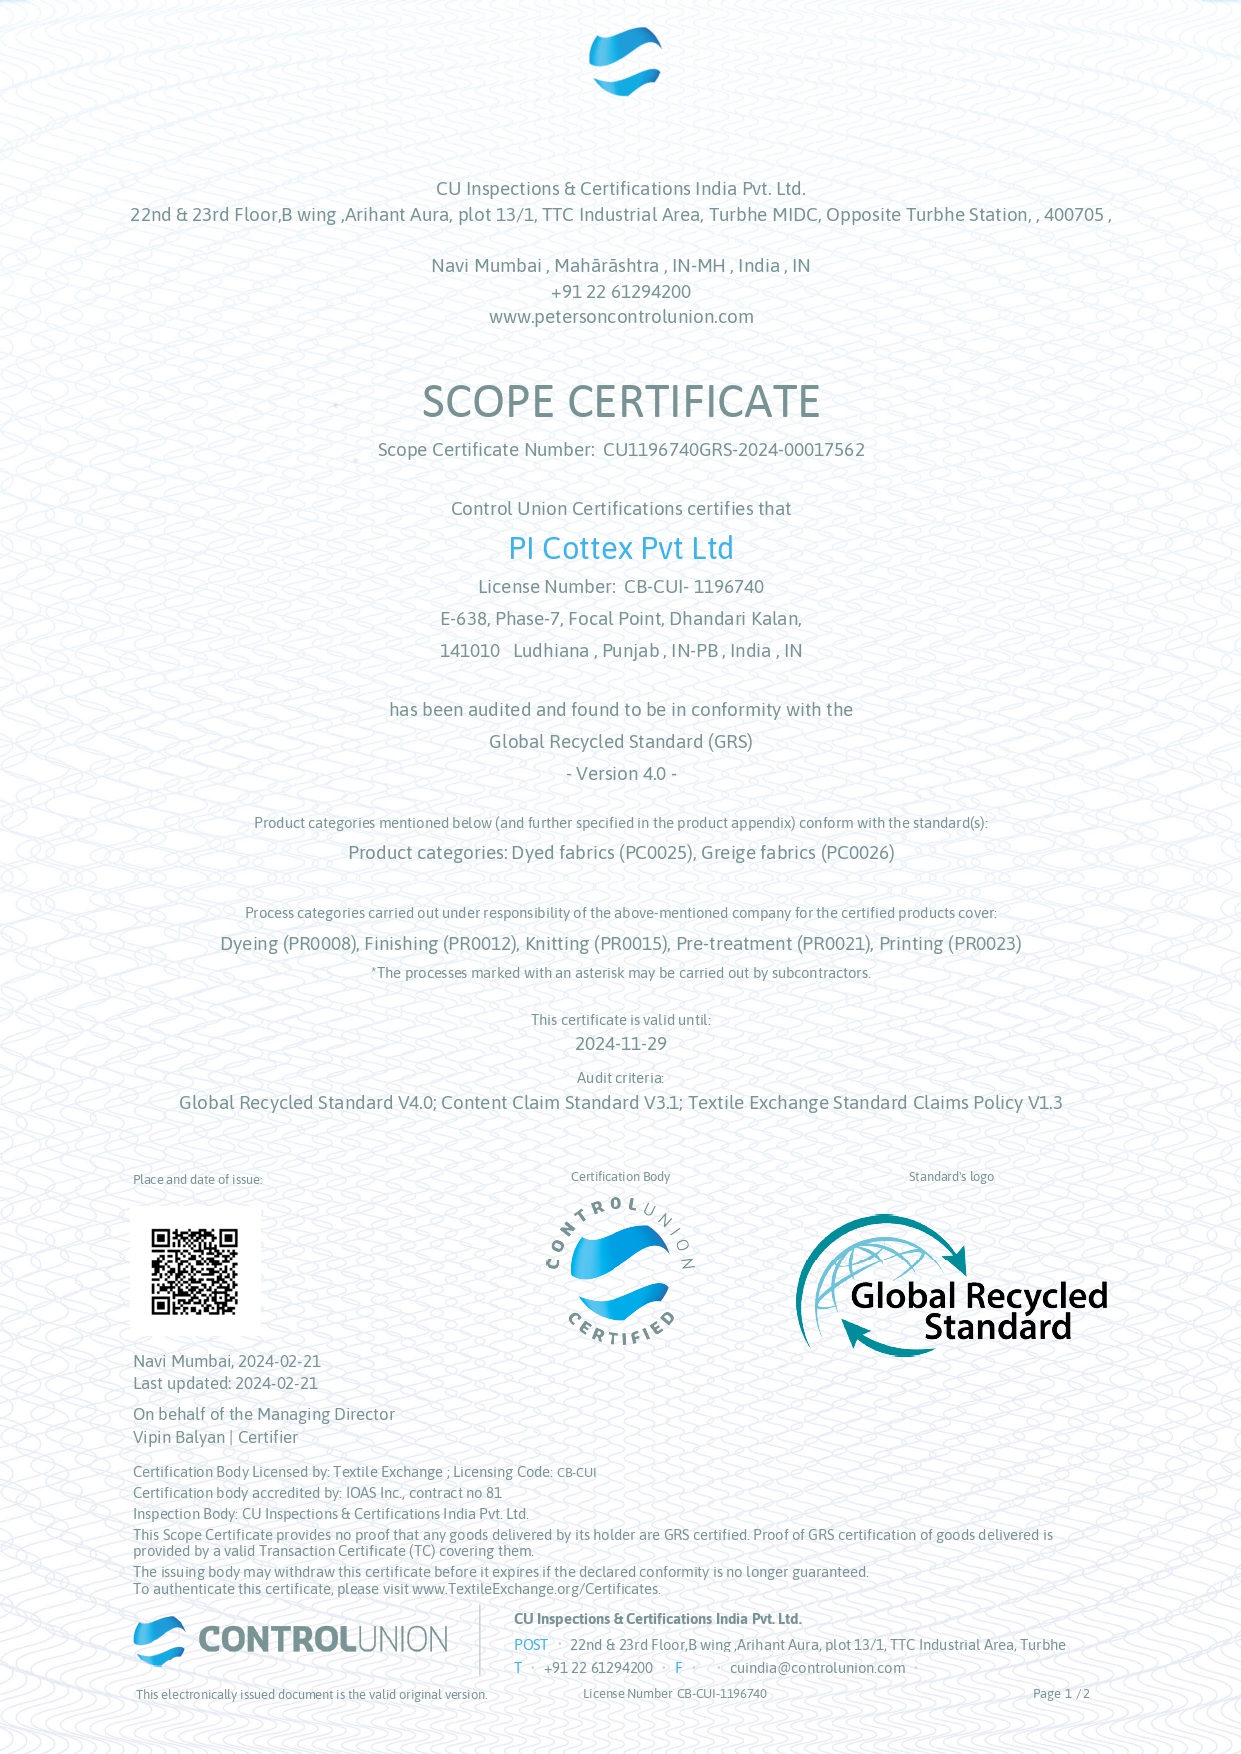 PI Cottexx is trusted by Global Recycled Standard